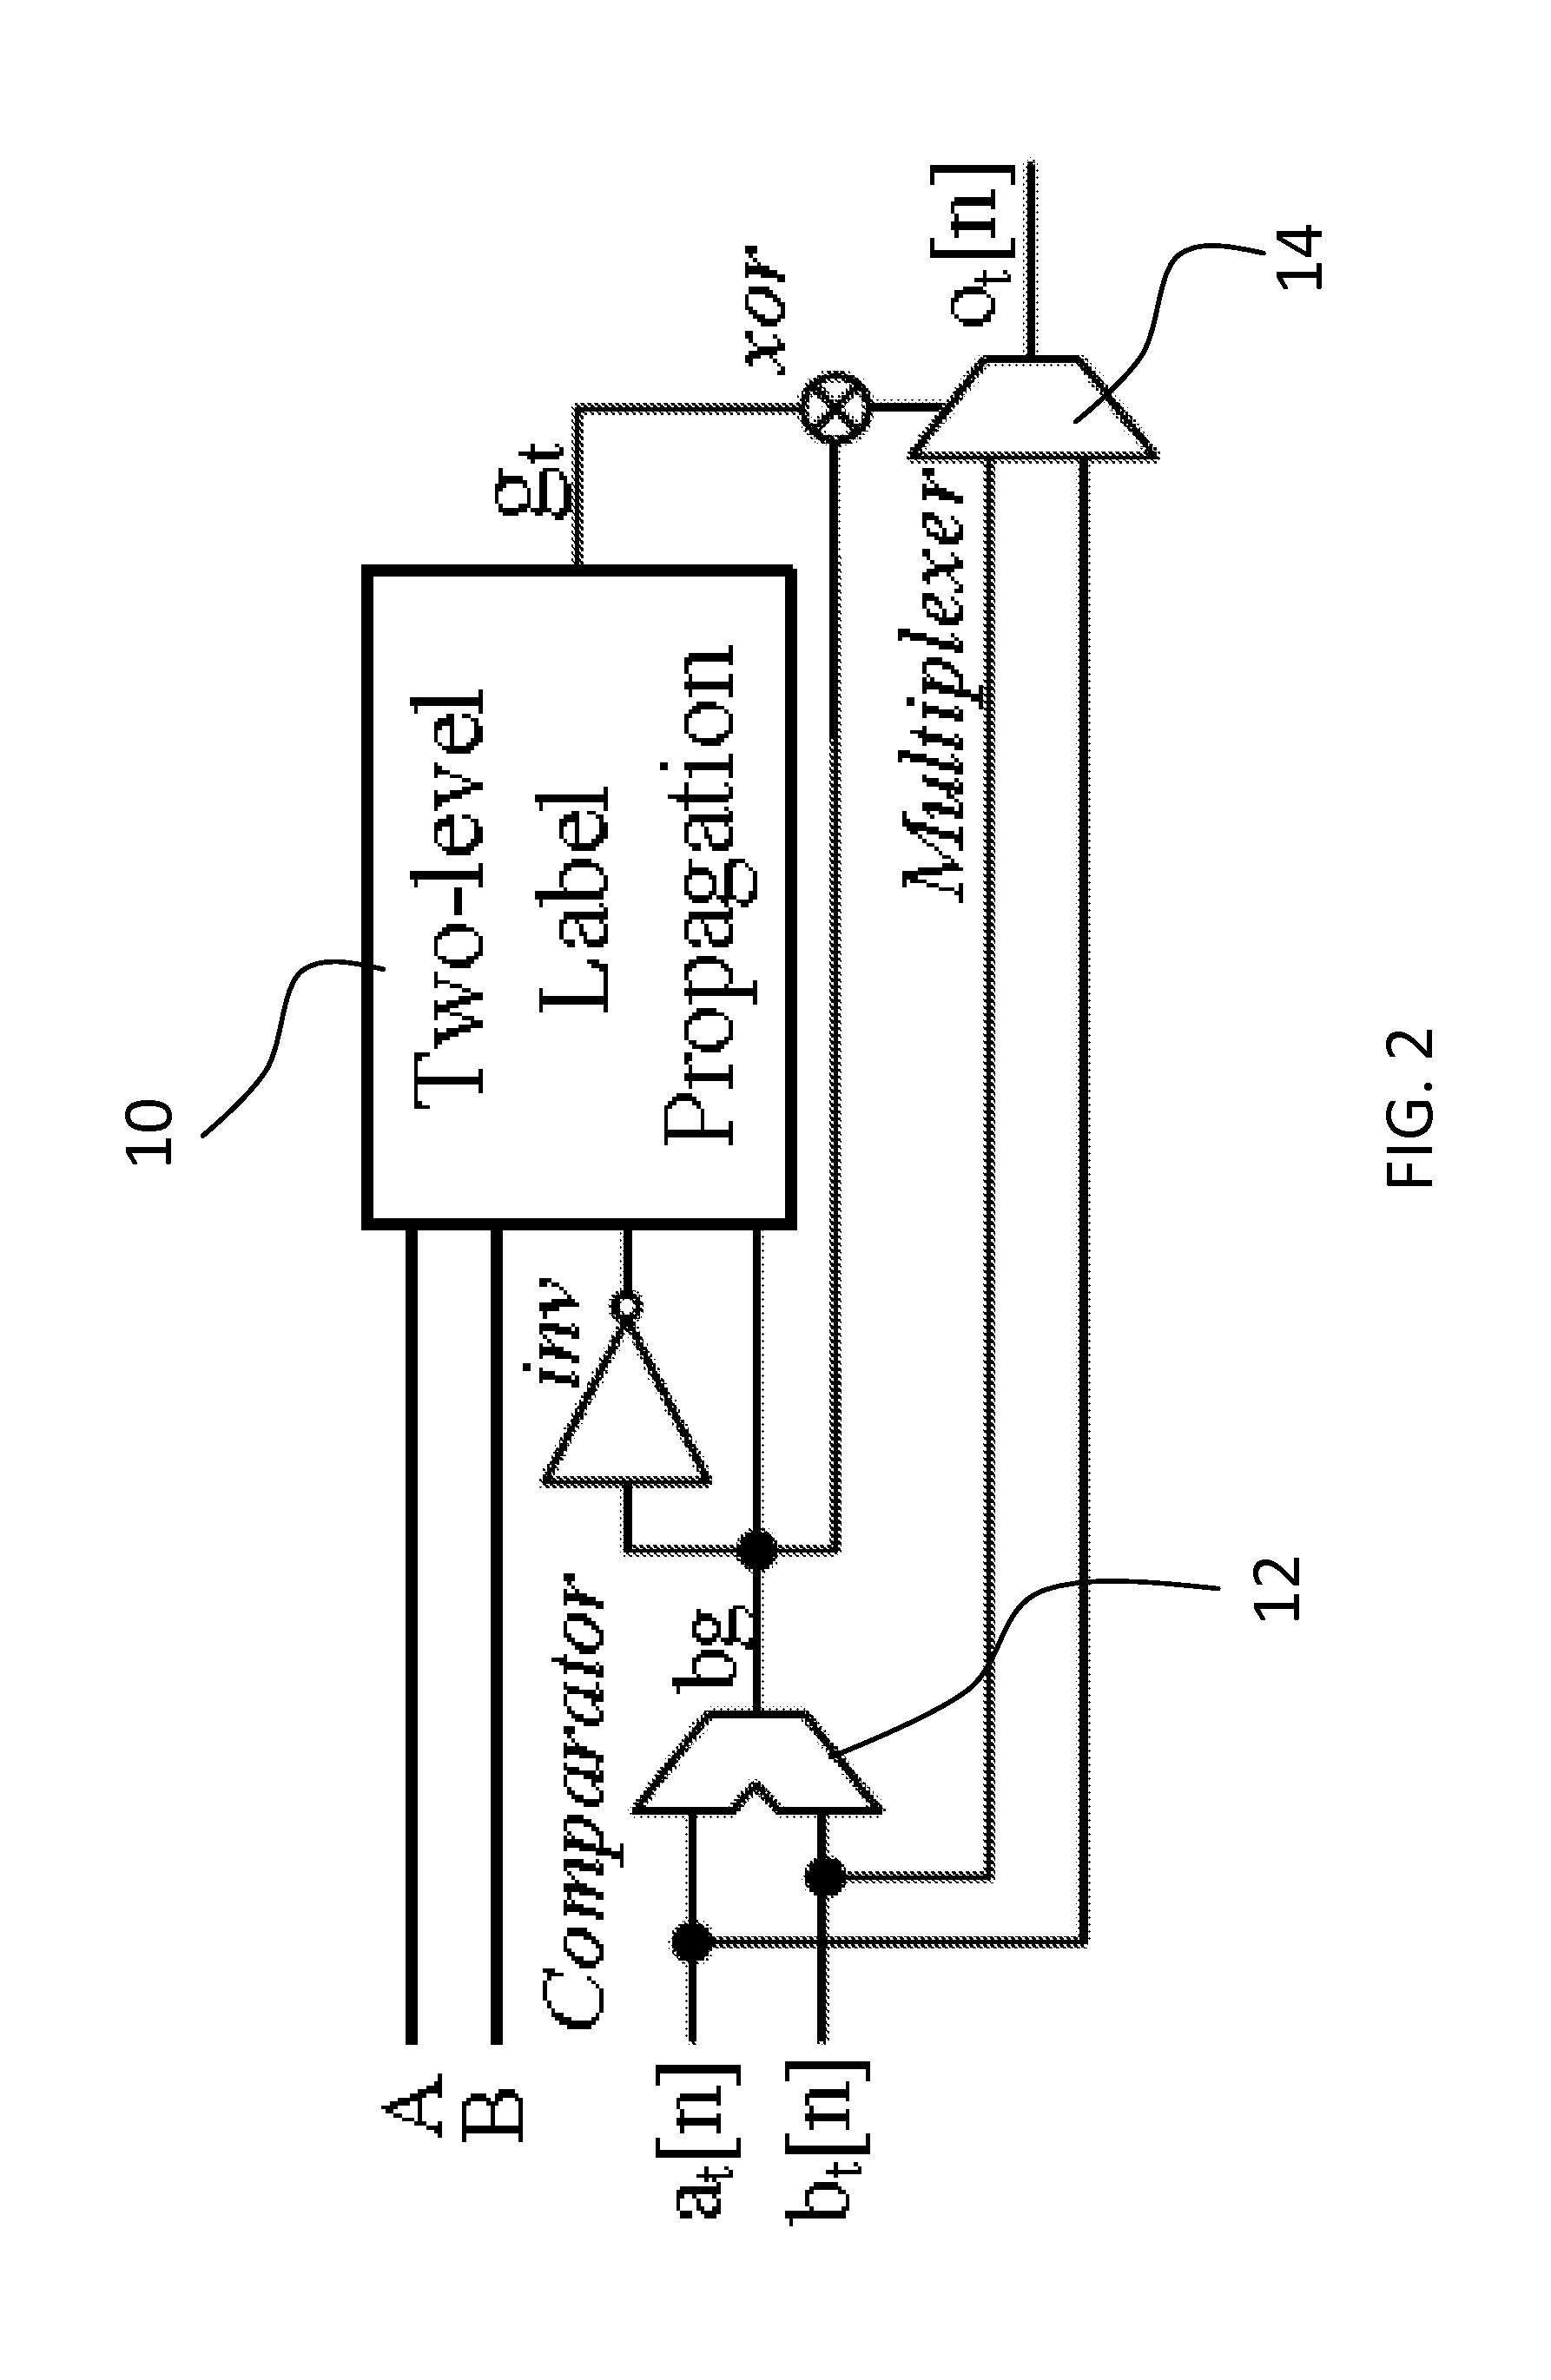 Method and system providing mutli-level security to gate level information flow